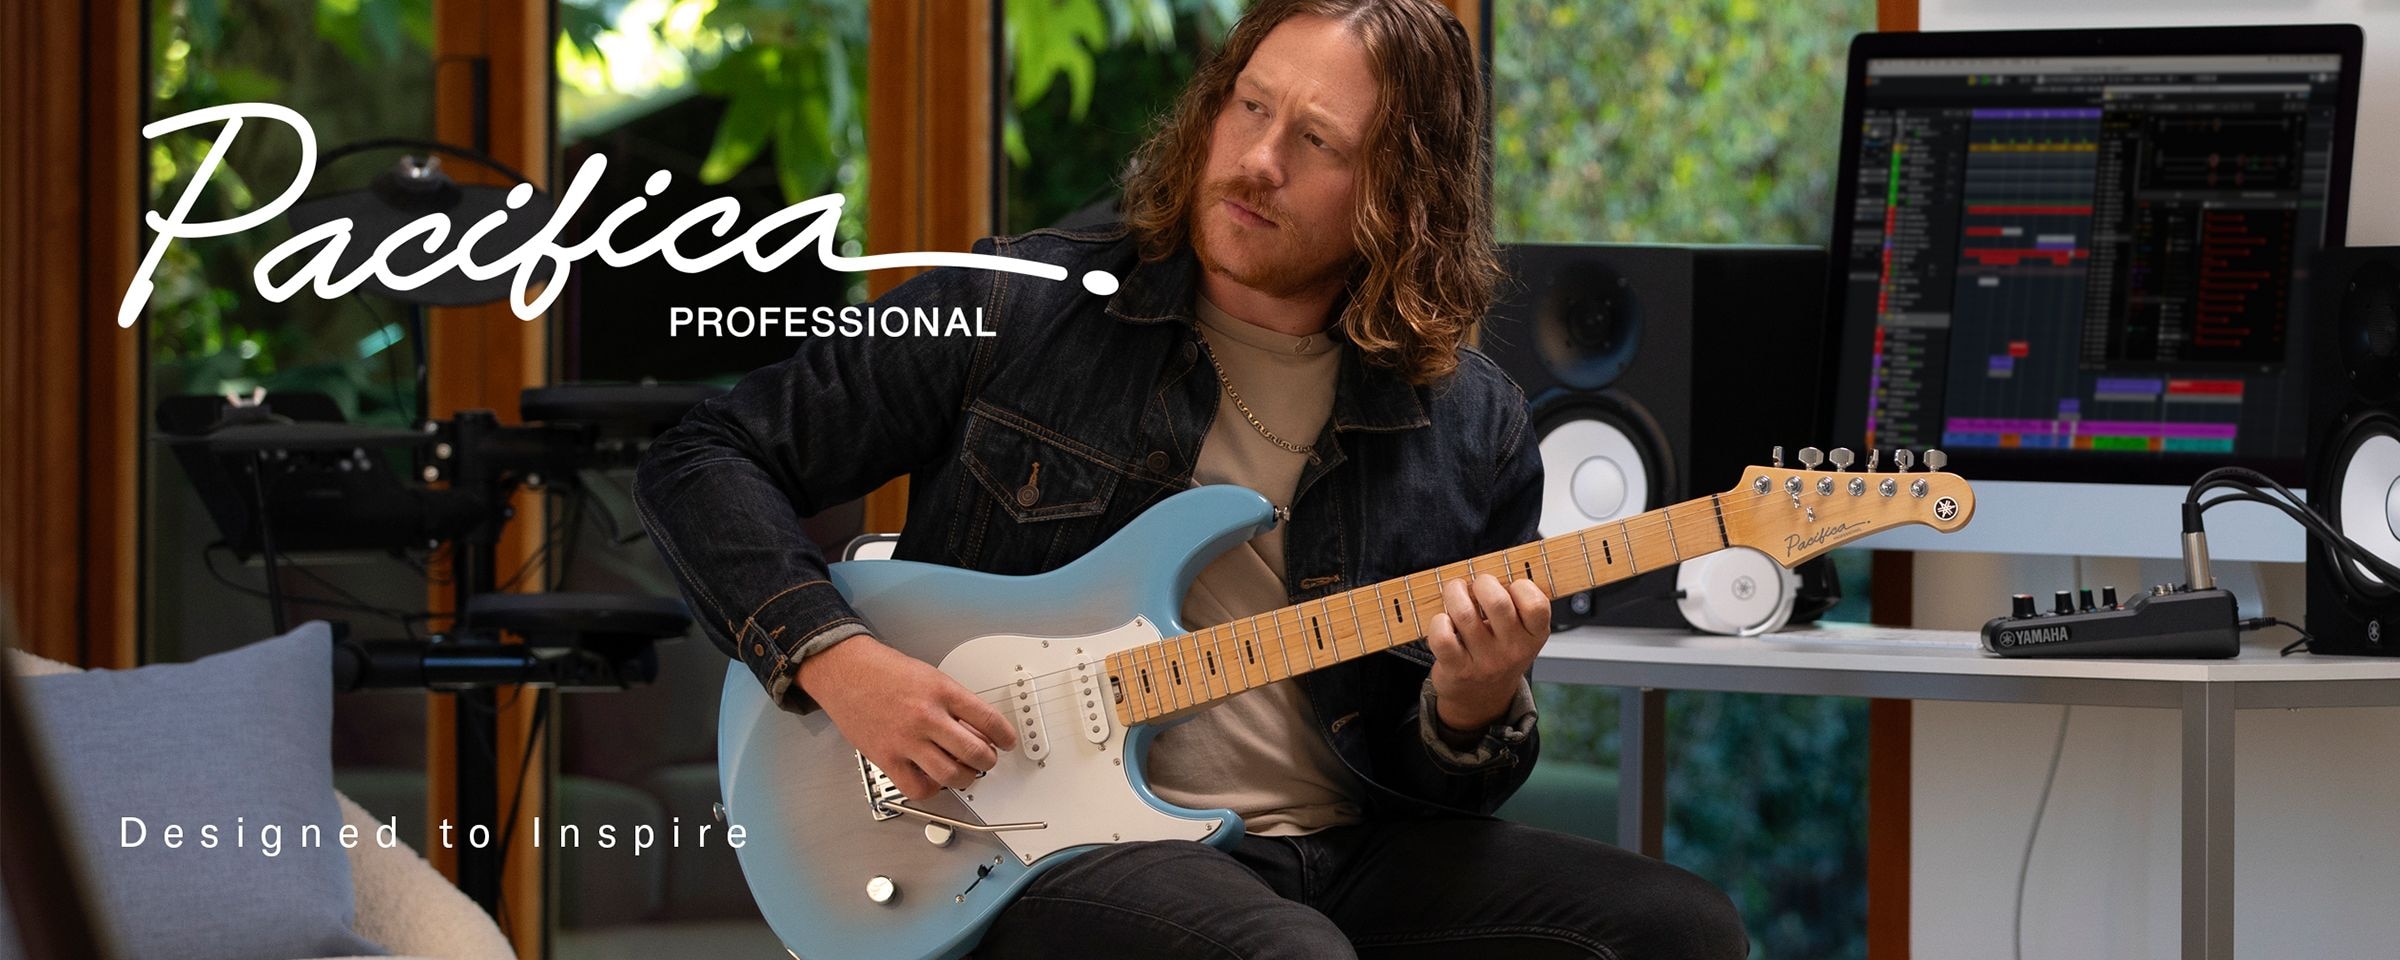 Pacifica professional logo & designed to inspire text. Male in home studio playing Beach Blue Burst.